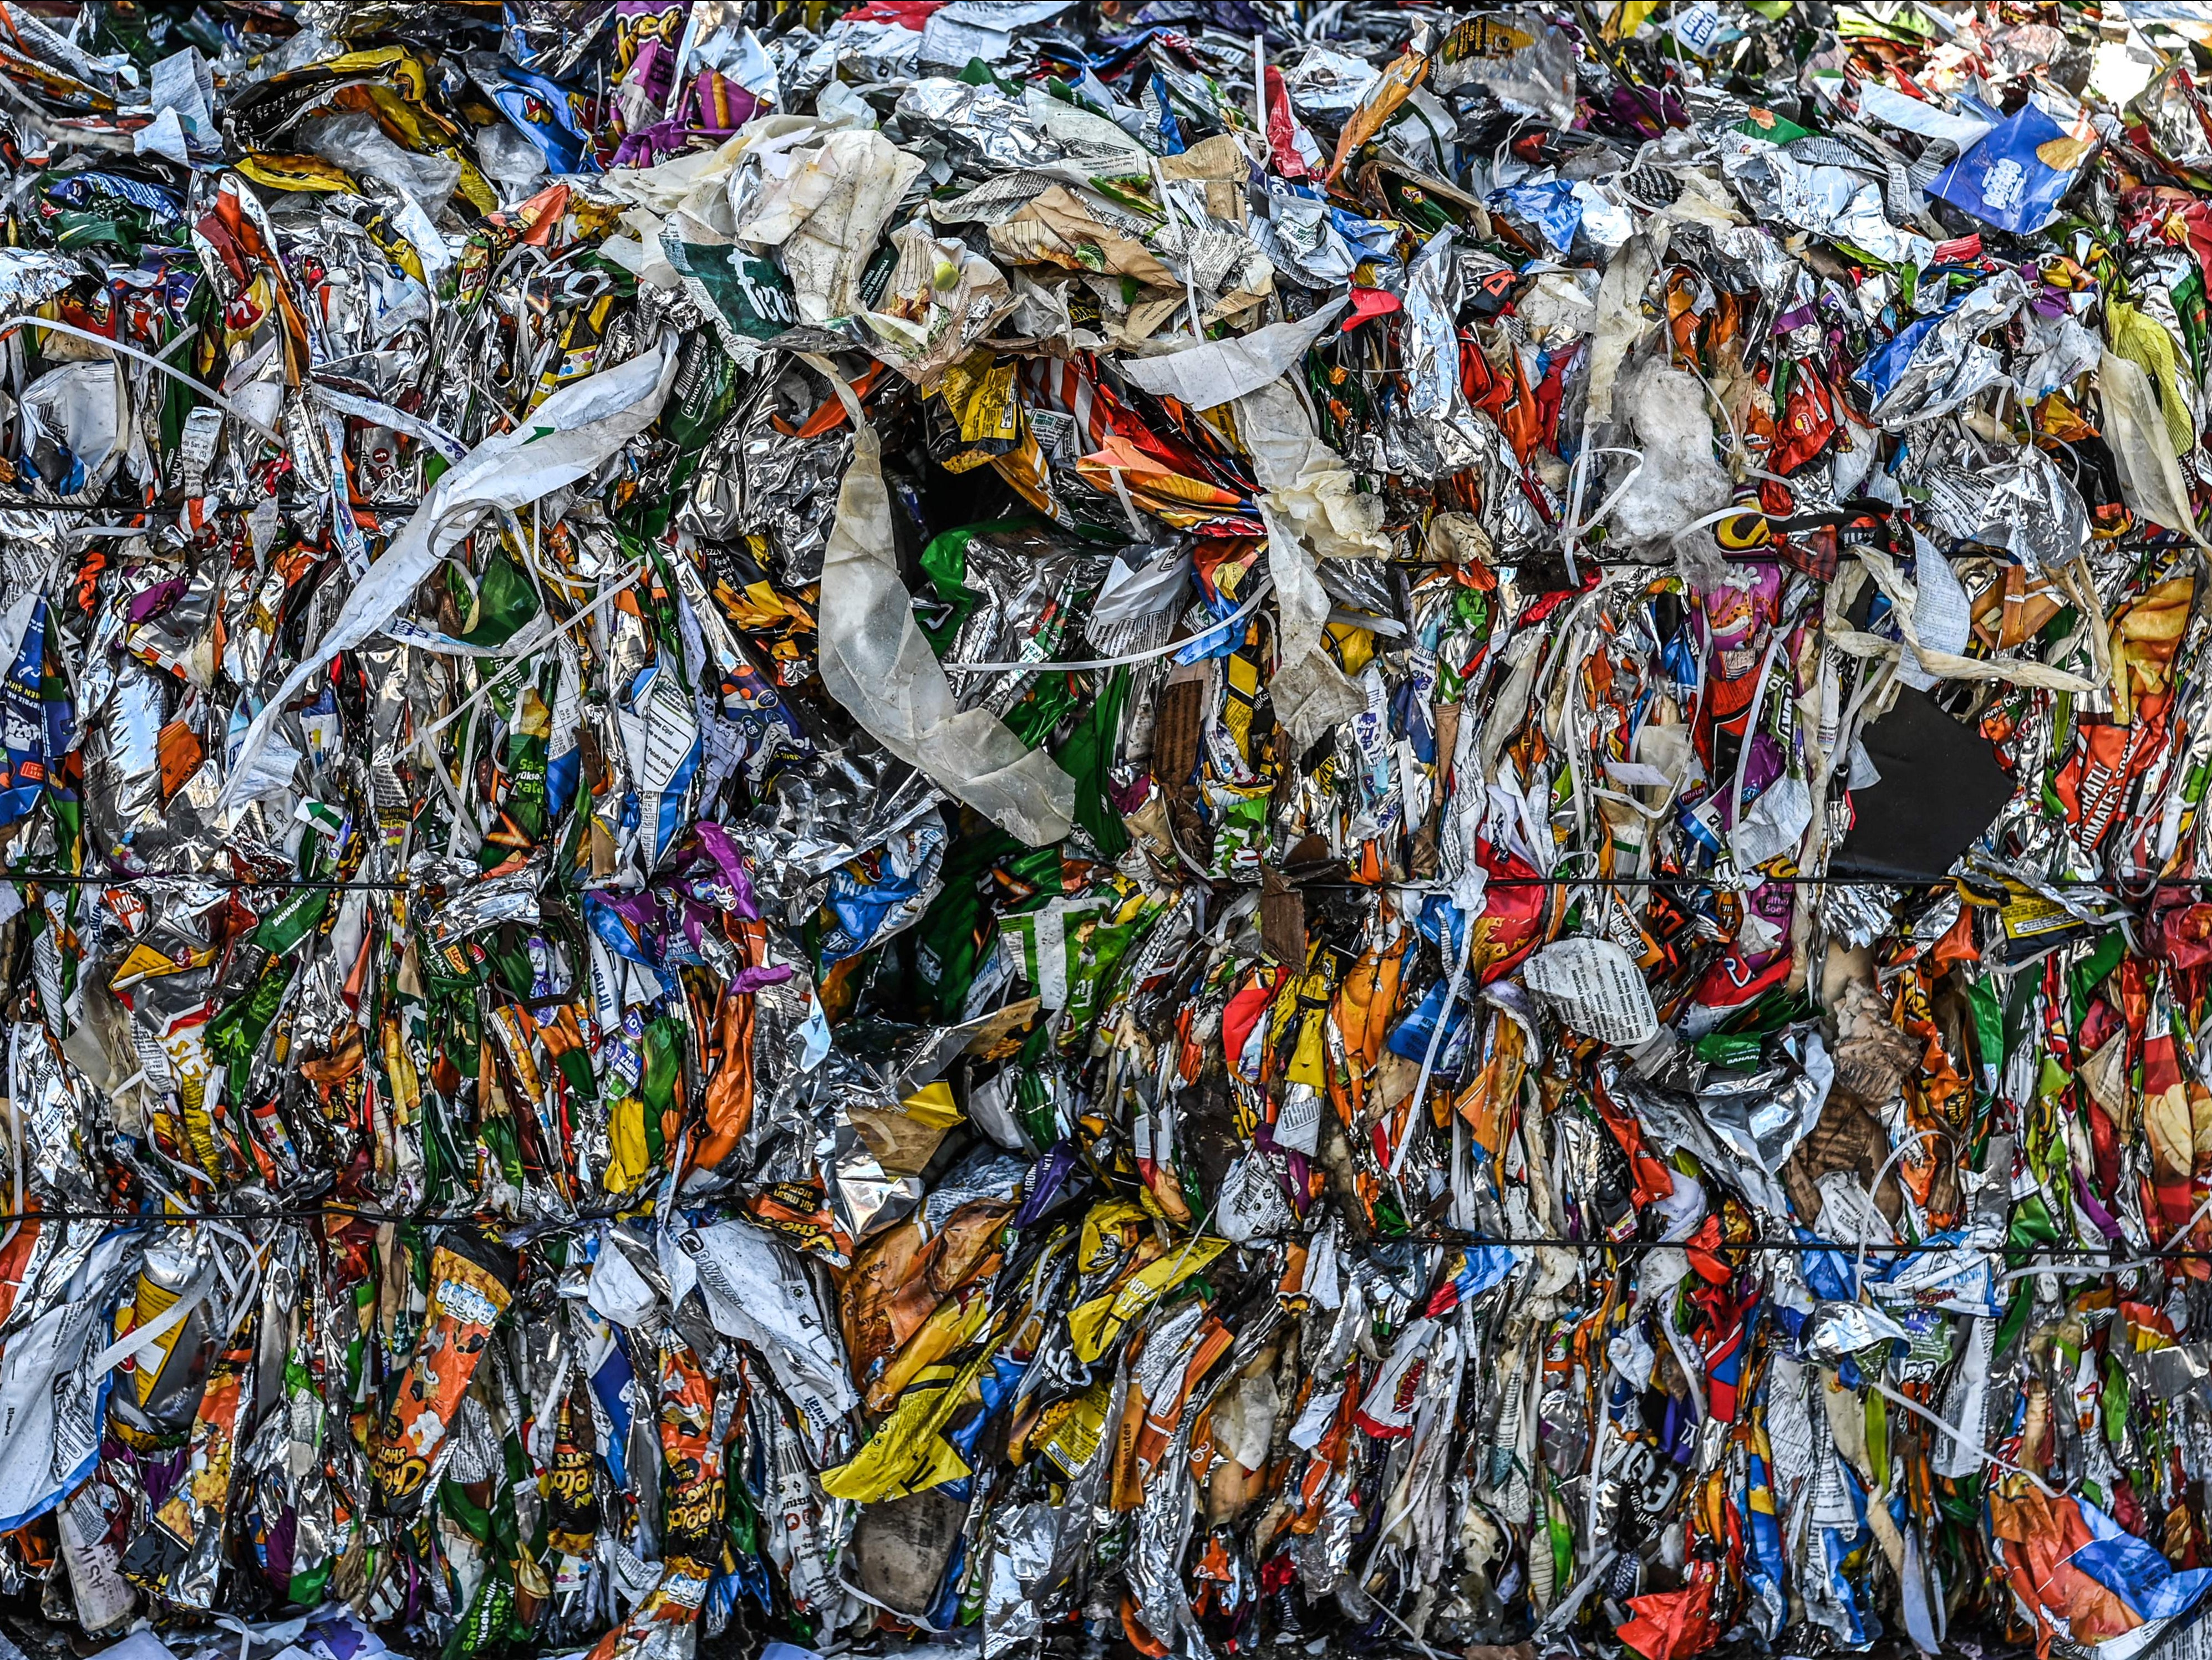 Stacks of plastic waste collected near to the plastic recycling plants in Kartepe district of Kocaeli, Turkey